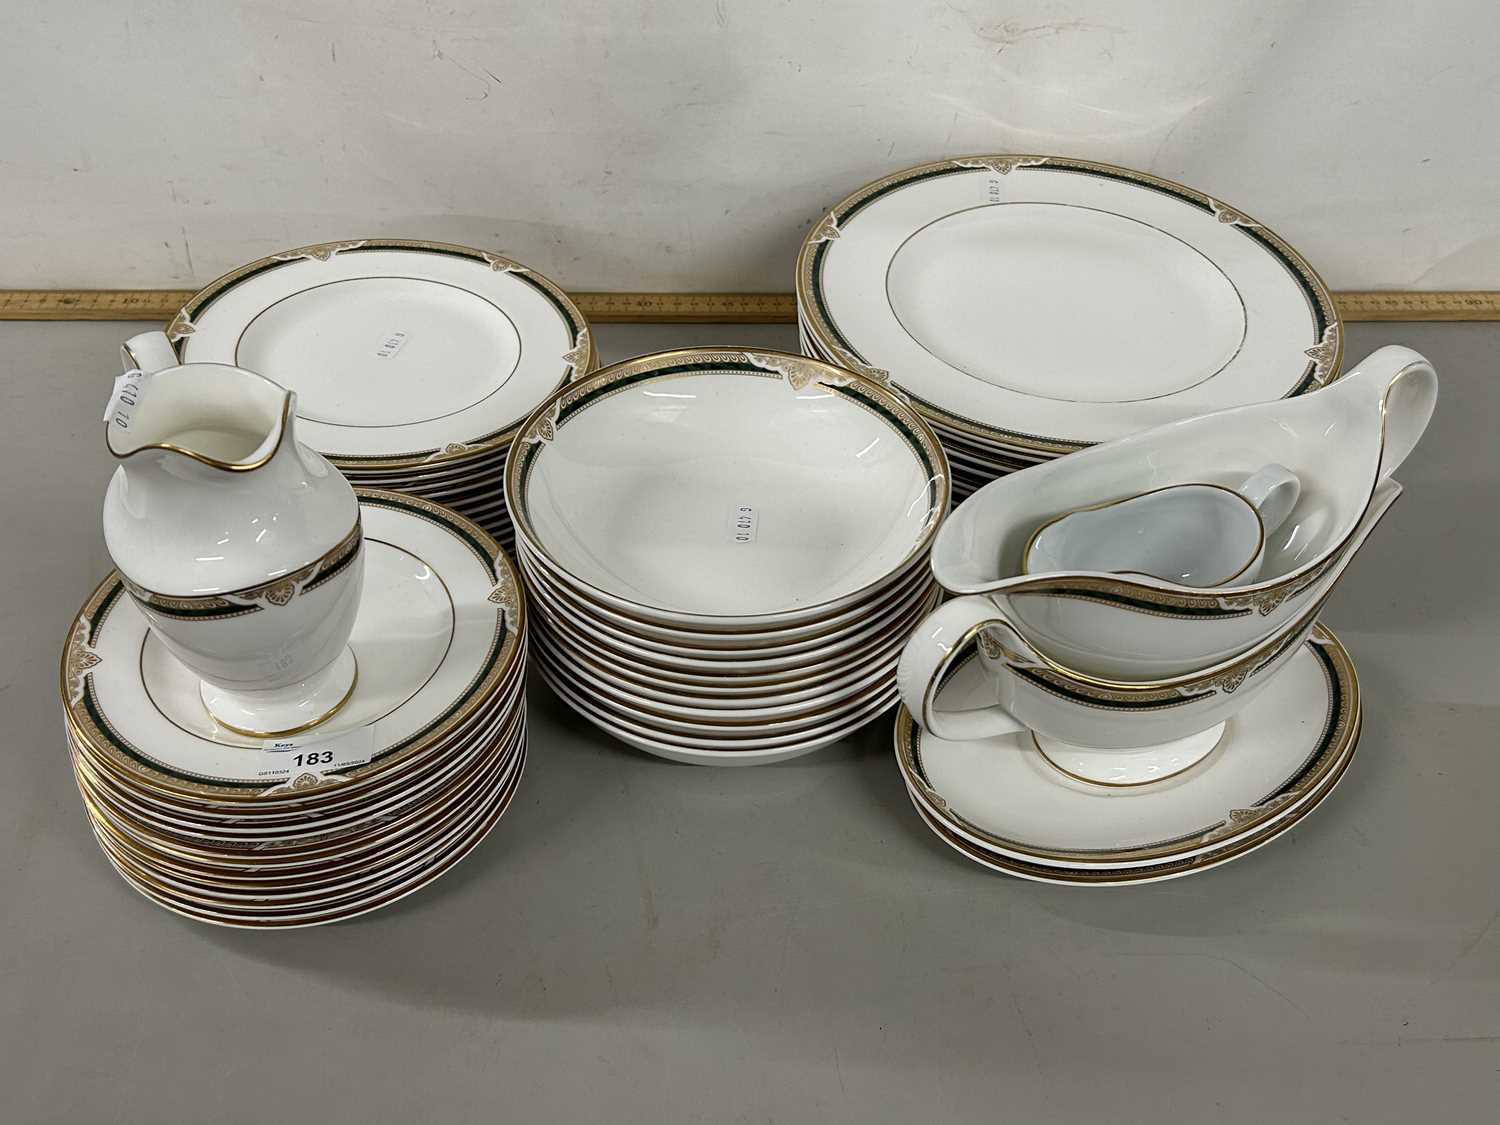 Quantity of Royal Doulton Forsyth table wares